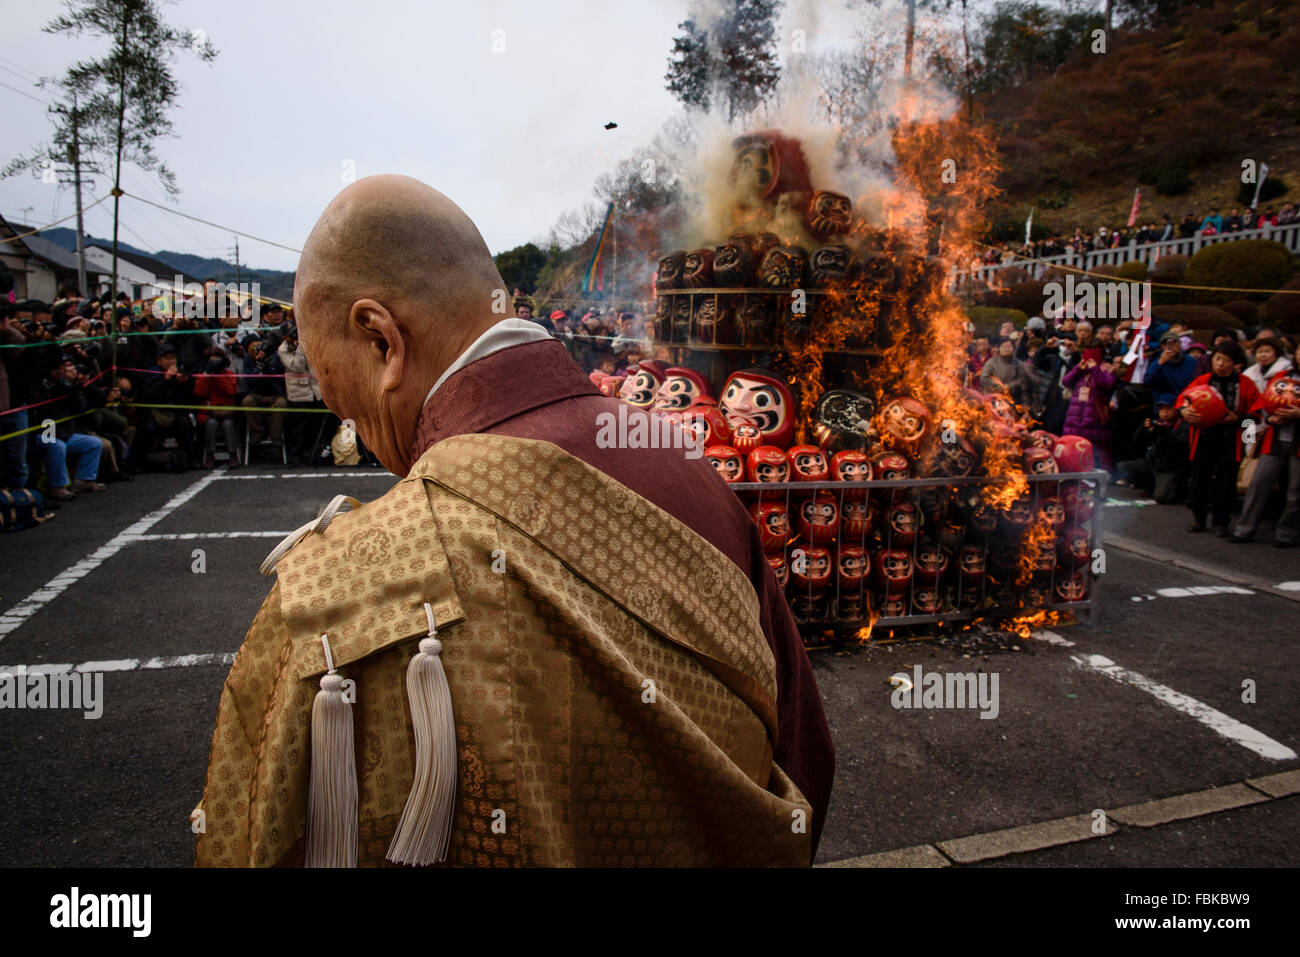 Gifu, Japan. 17th Jan, 2016. A Buddhist monk watches the start of the Daruma Kuyo doll burning ceremony at Dairyu Temple in Gifu, Japan. People buy the dolls, which are thought to bring good luck, at the start of the year, and burn ones from the previous year. 10,000 dolls are burned during the ceremony. Credit:  Ben Weller/AFLO/Alamy Live News Stock Photo